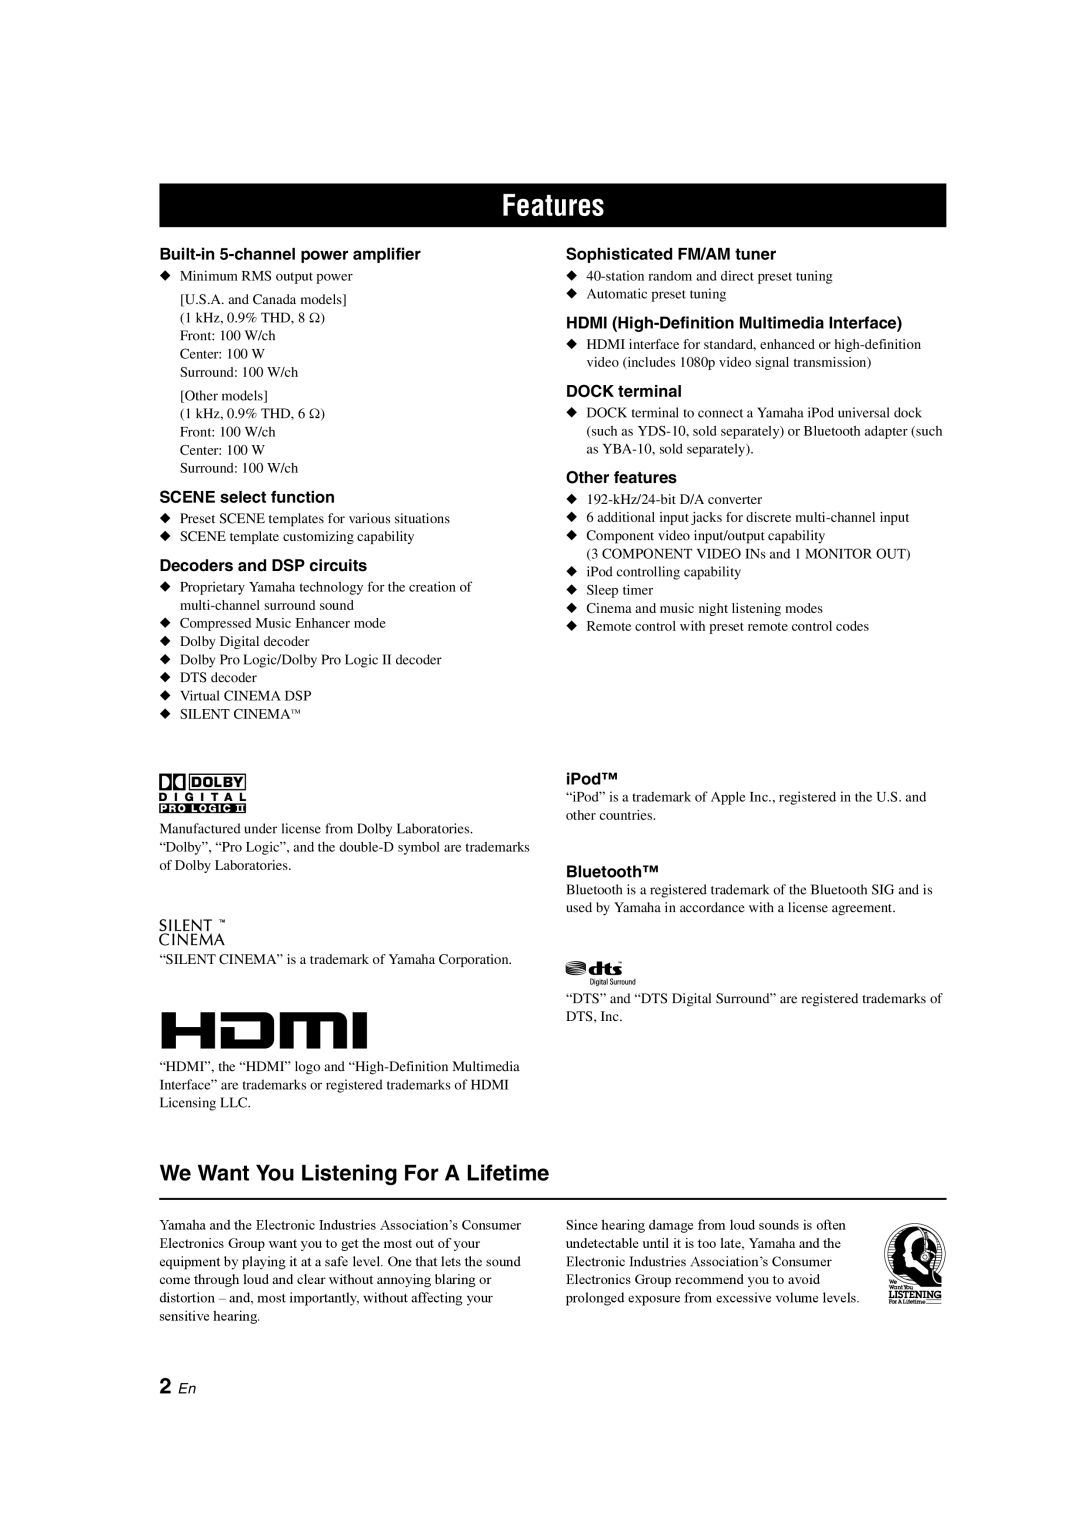 Yamaha HTR-6130 owner manual Features, We Want You Listening For A Lifetime, 2 En 